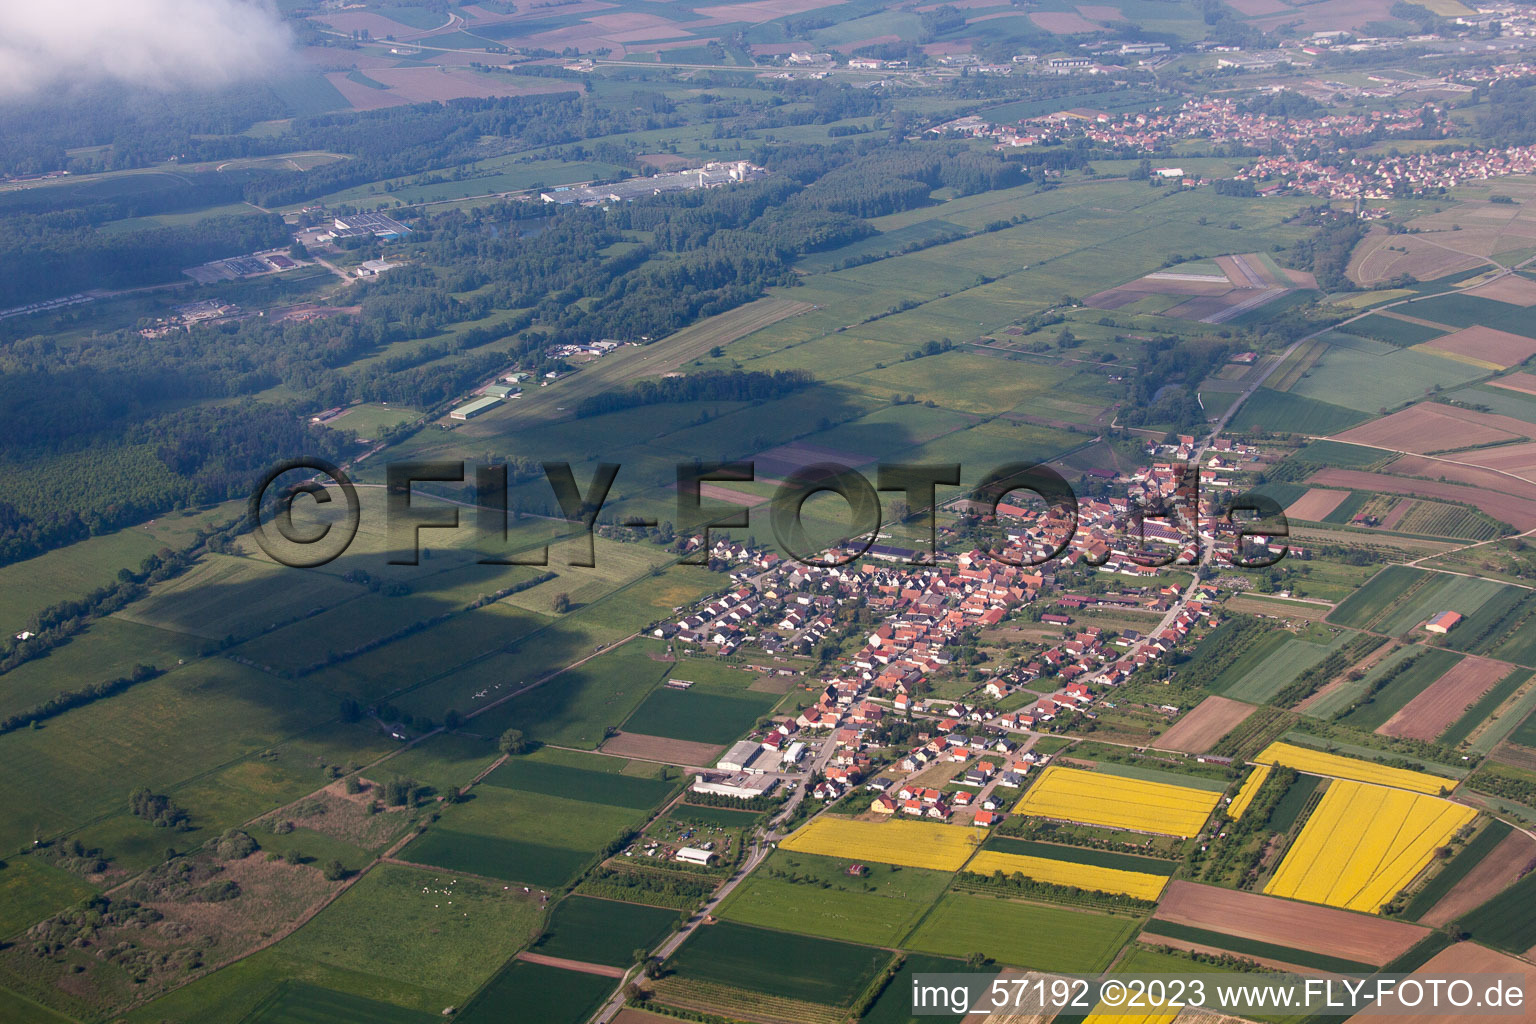 Schweighofen in the state Rhineland-Palatinate, Germany seen from above